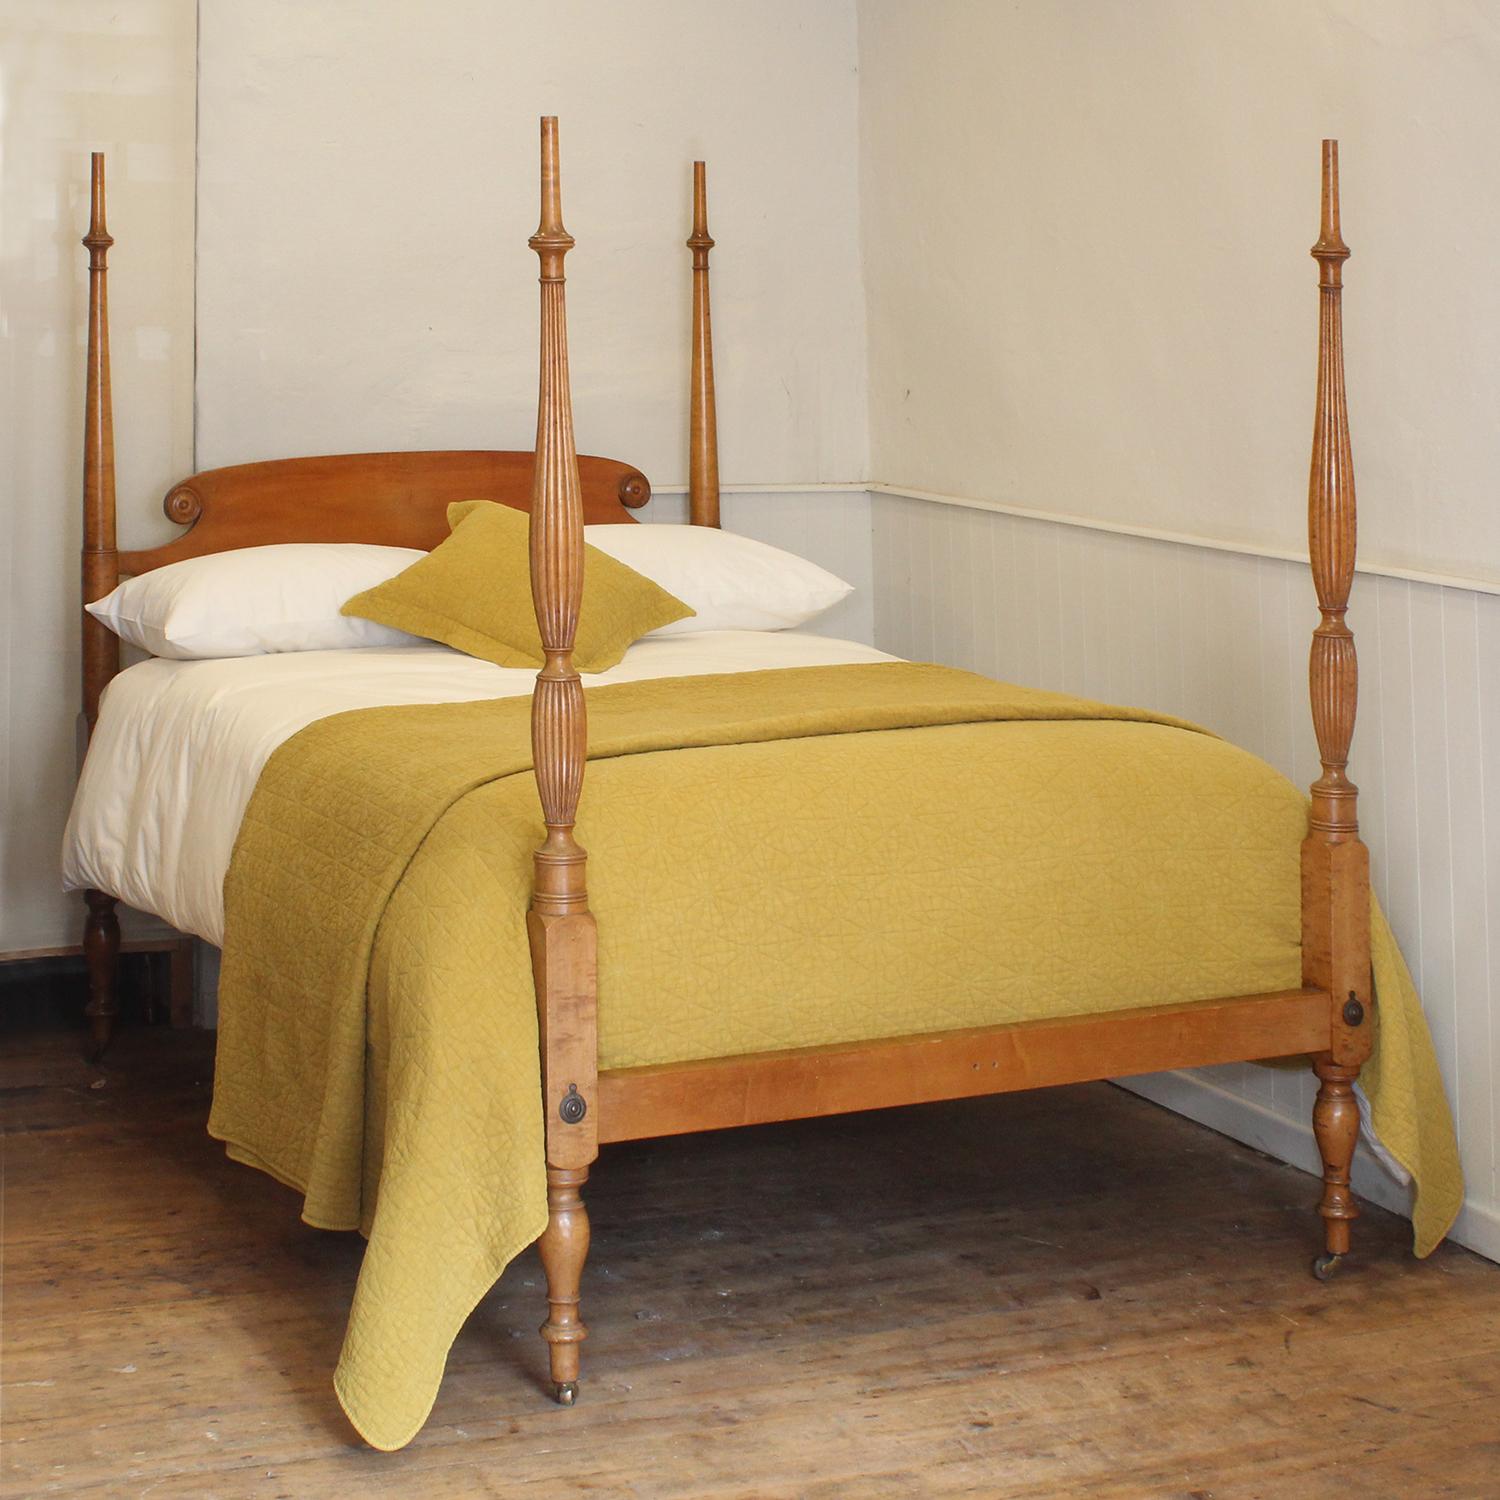 A fine example of an American Federal Four Poster Bed fashioned from maple and originating from the USA in the early Nineteenth century. The back has an subtle curve backboard with scroll ends and simple turned posts. The foot posts are reeded with